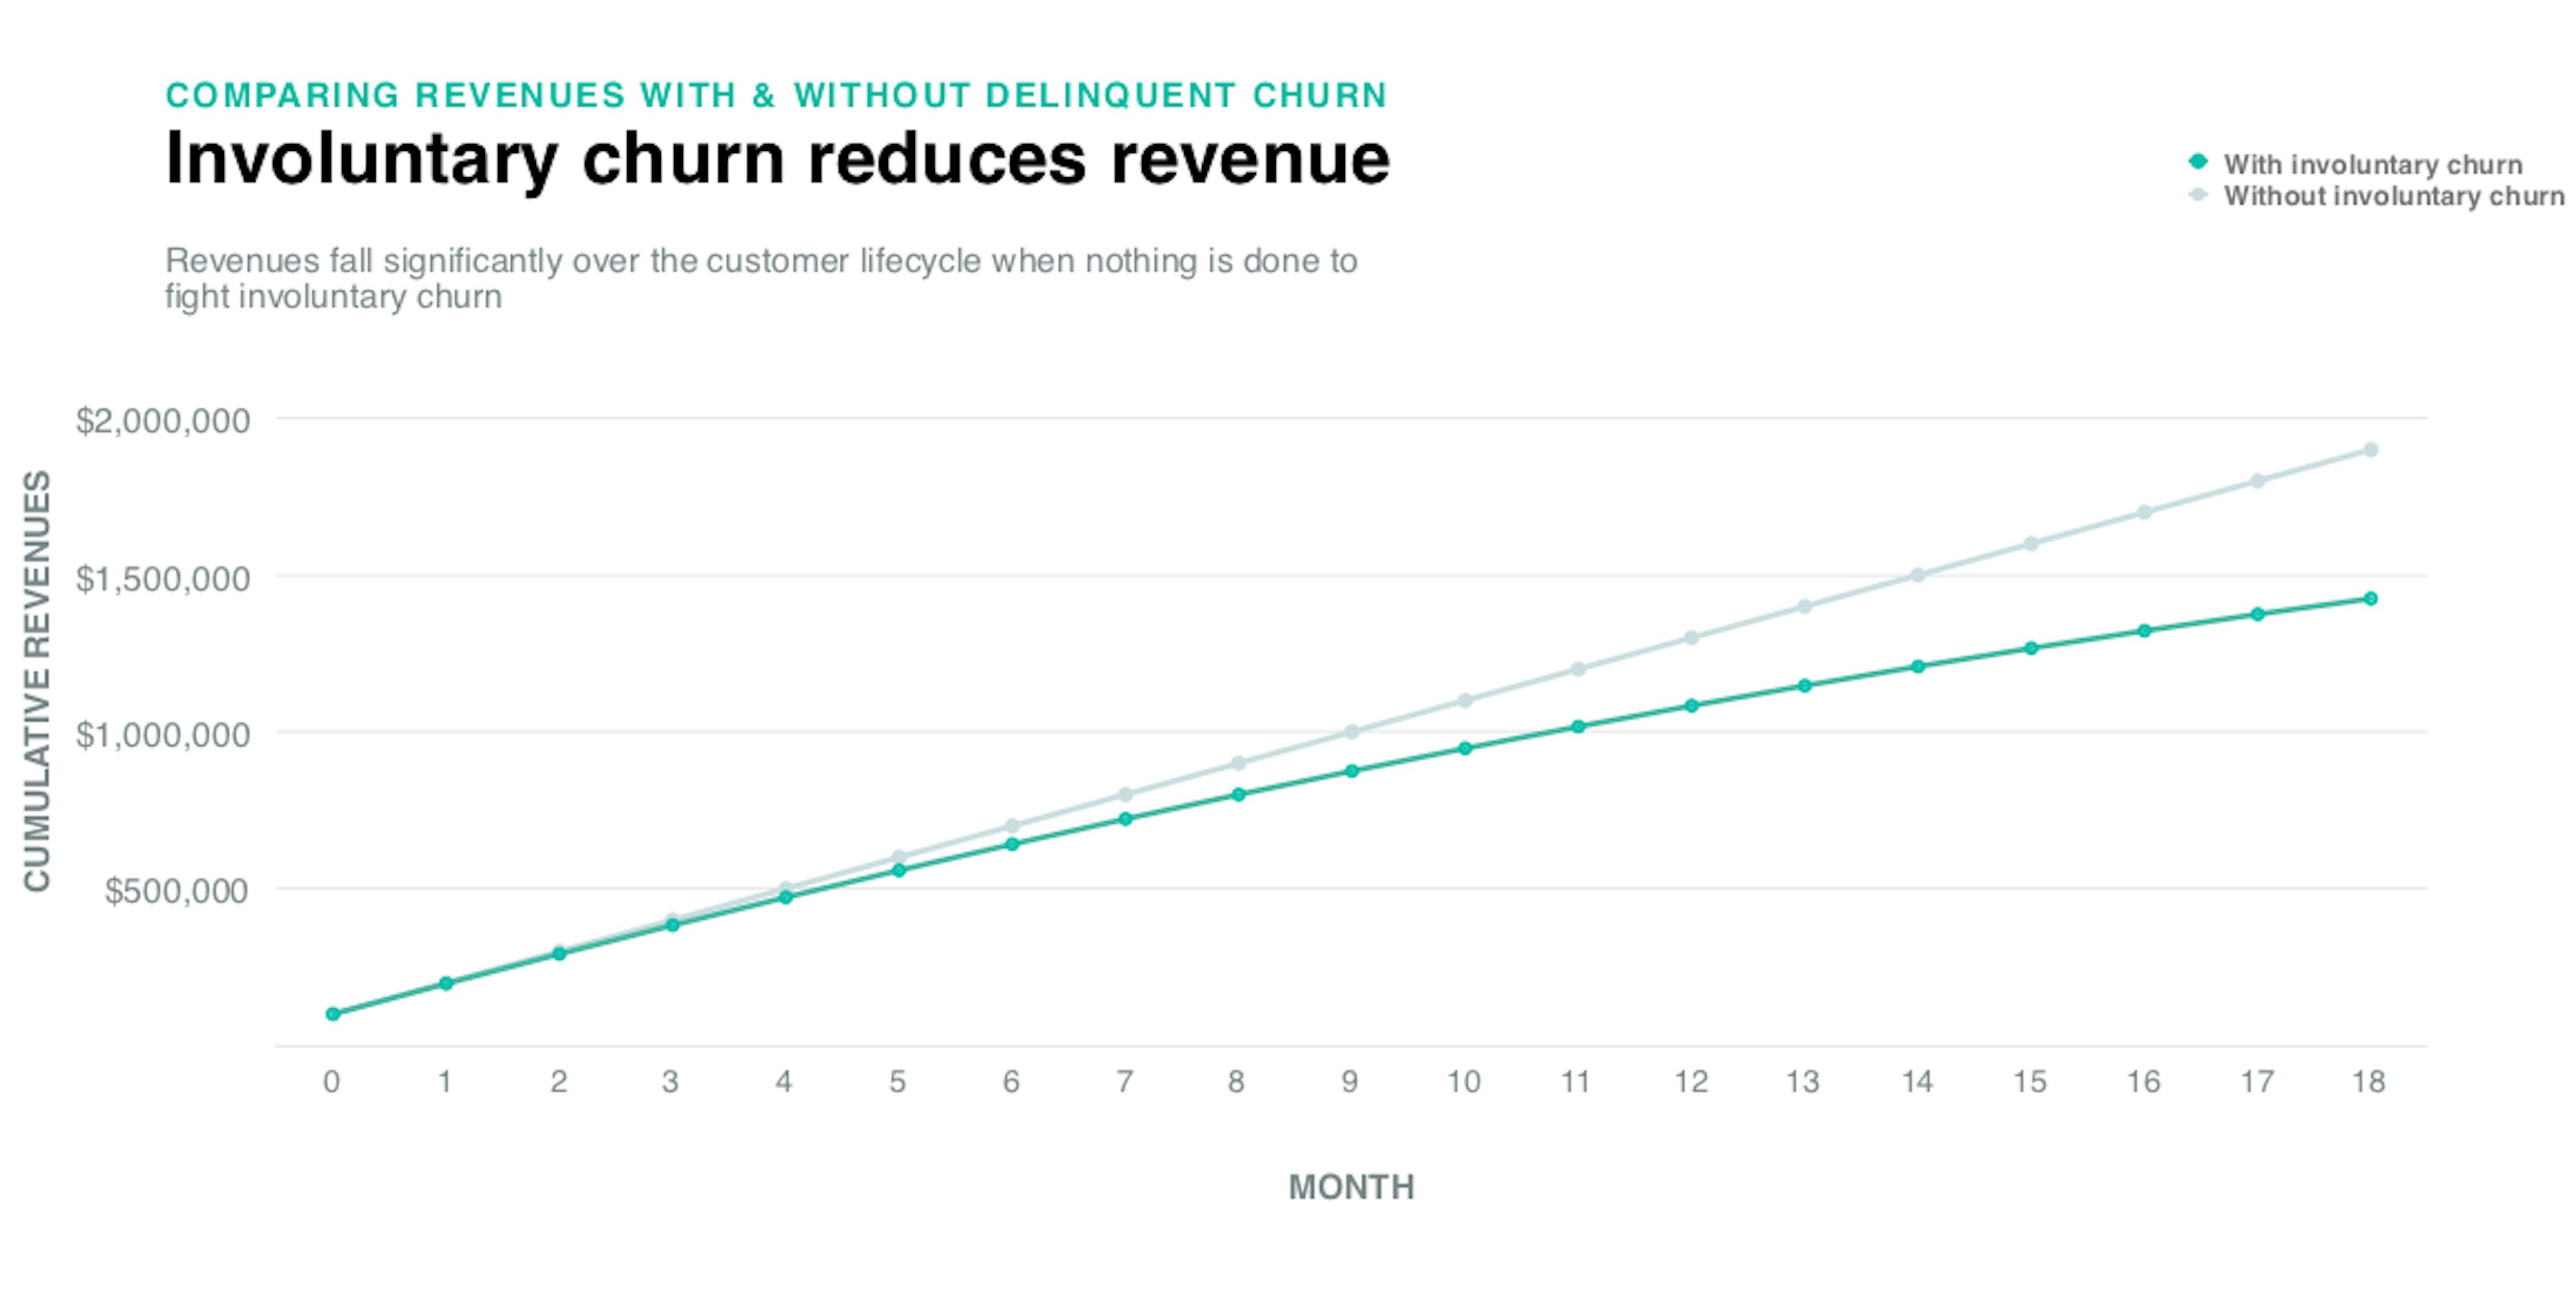 Chart shows how involuntary churn reduces revenue growth over time